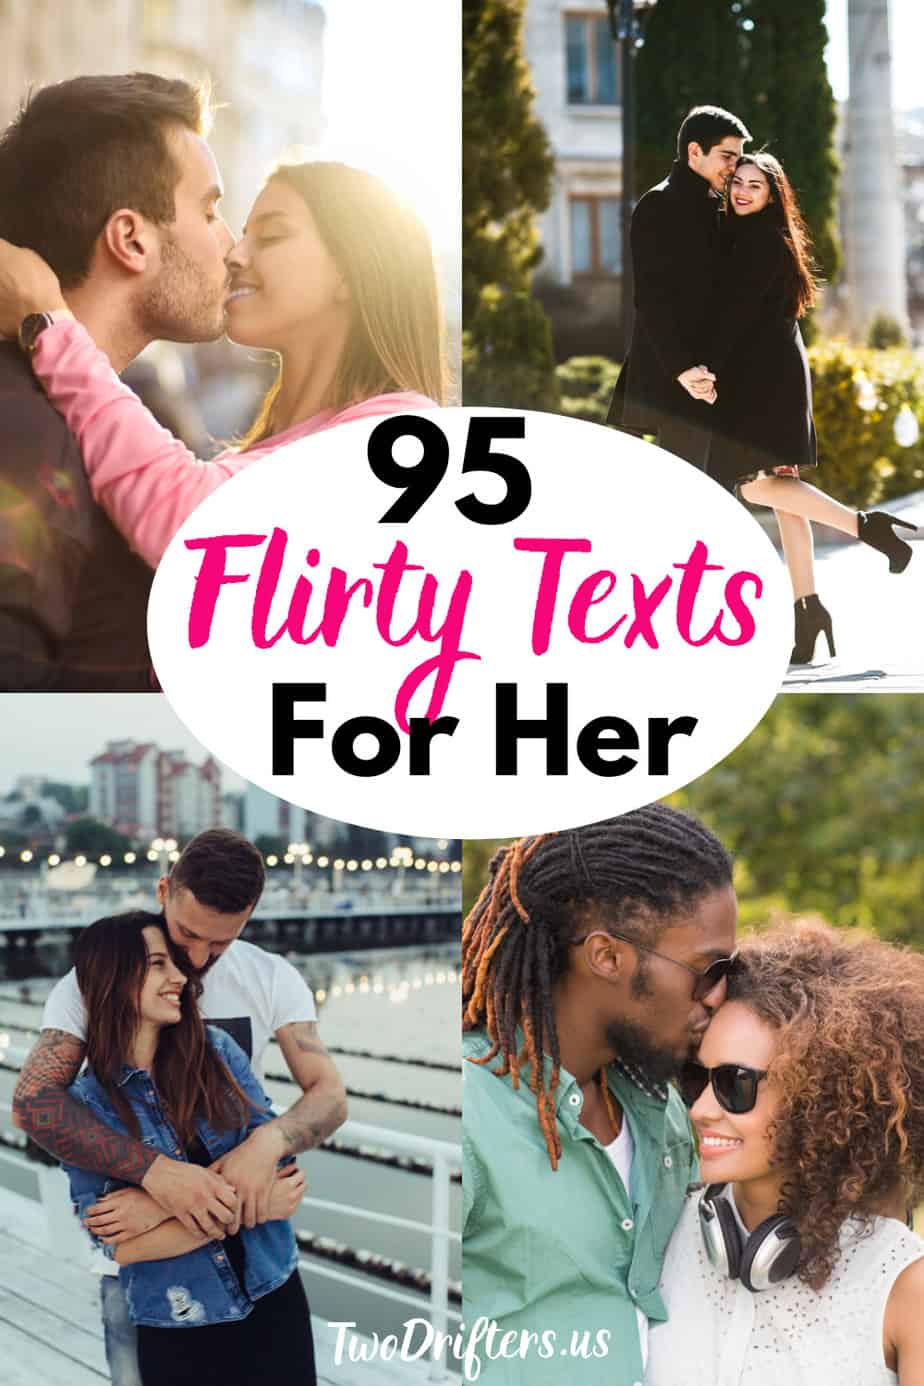 95 Flirty Texts for Her: Sweet Messages to Make Her Swoon